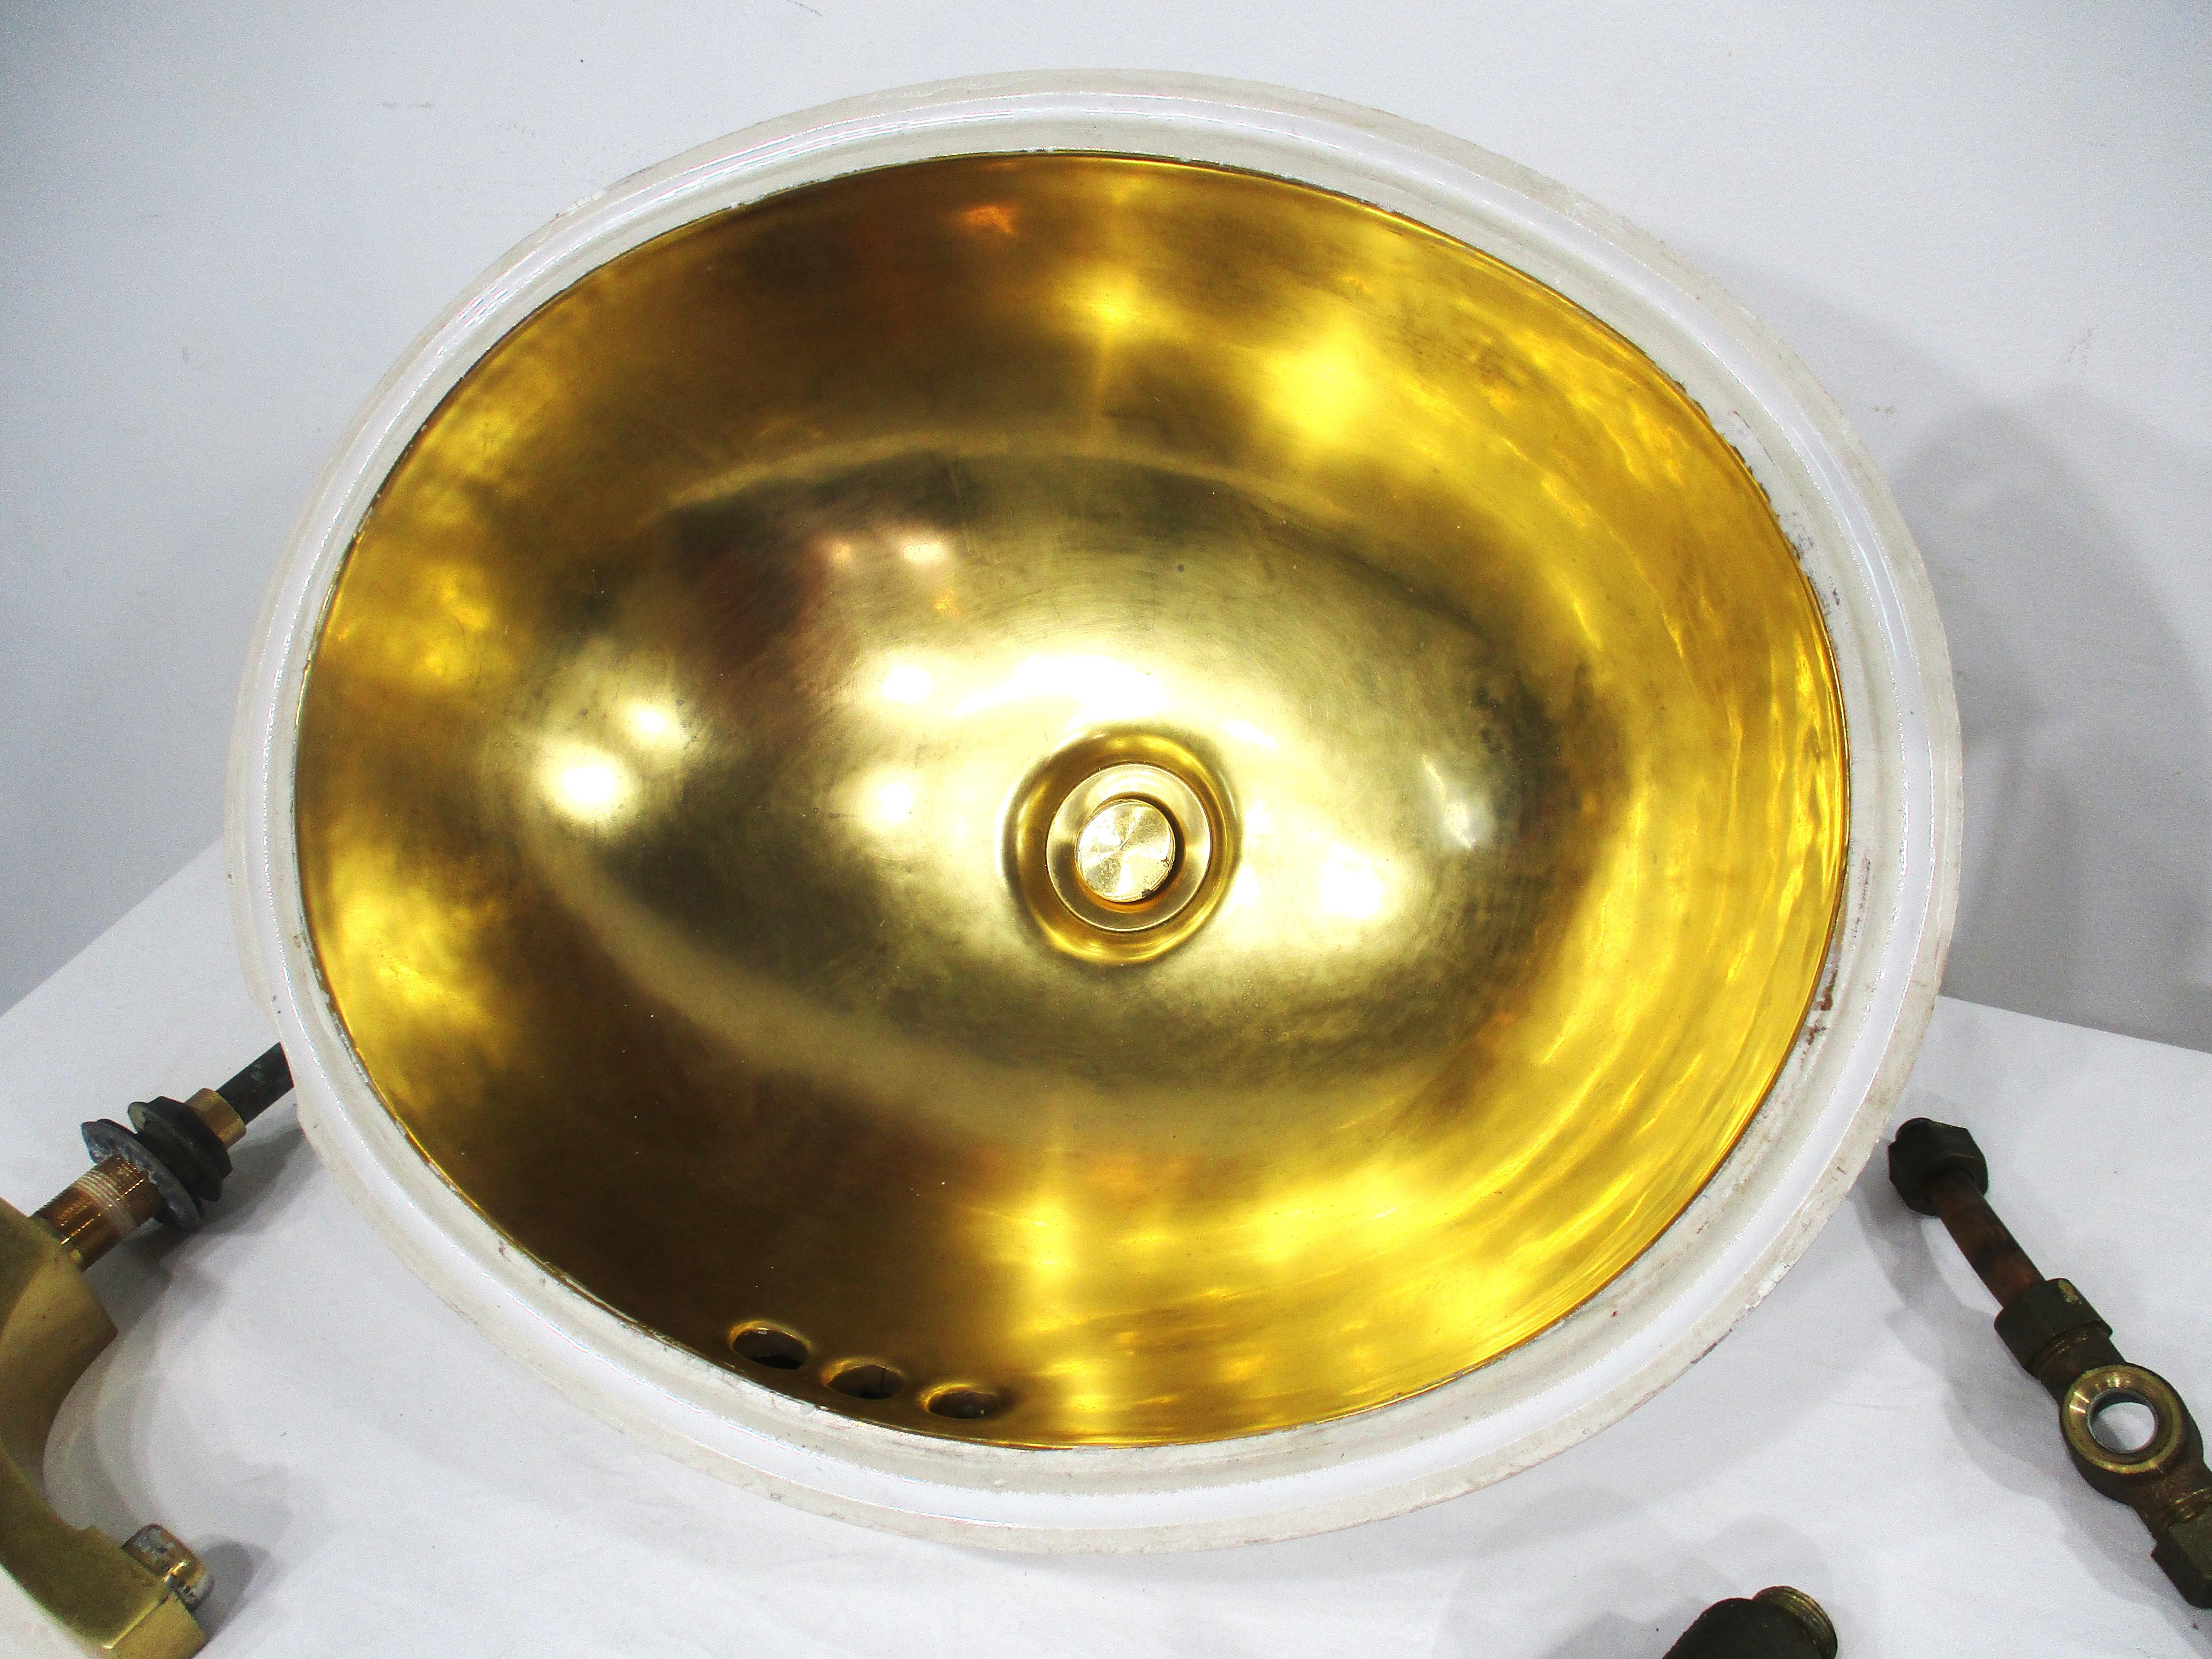 A well crafted set of fixtures having cut glass styled crystal lower handle bases with decorative 24K gold plated laurel mounting plates  . The sink , faucet , porcelain bowl and bottom drain cover also have a 24K plating . Manufactured to a very